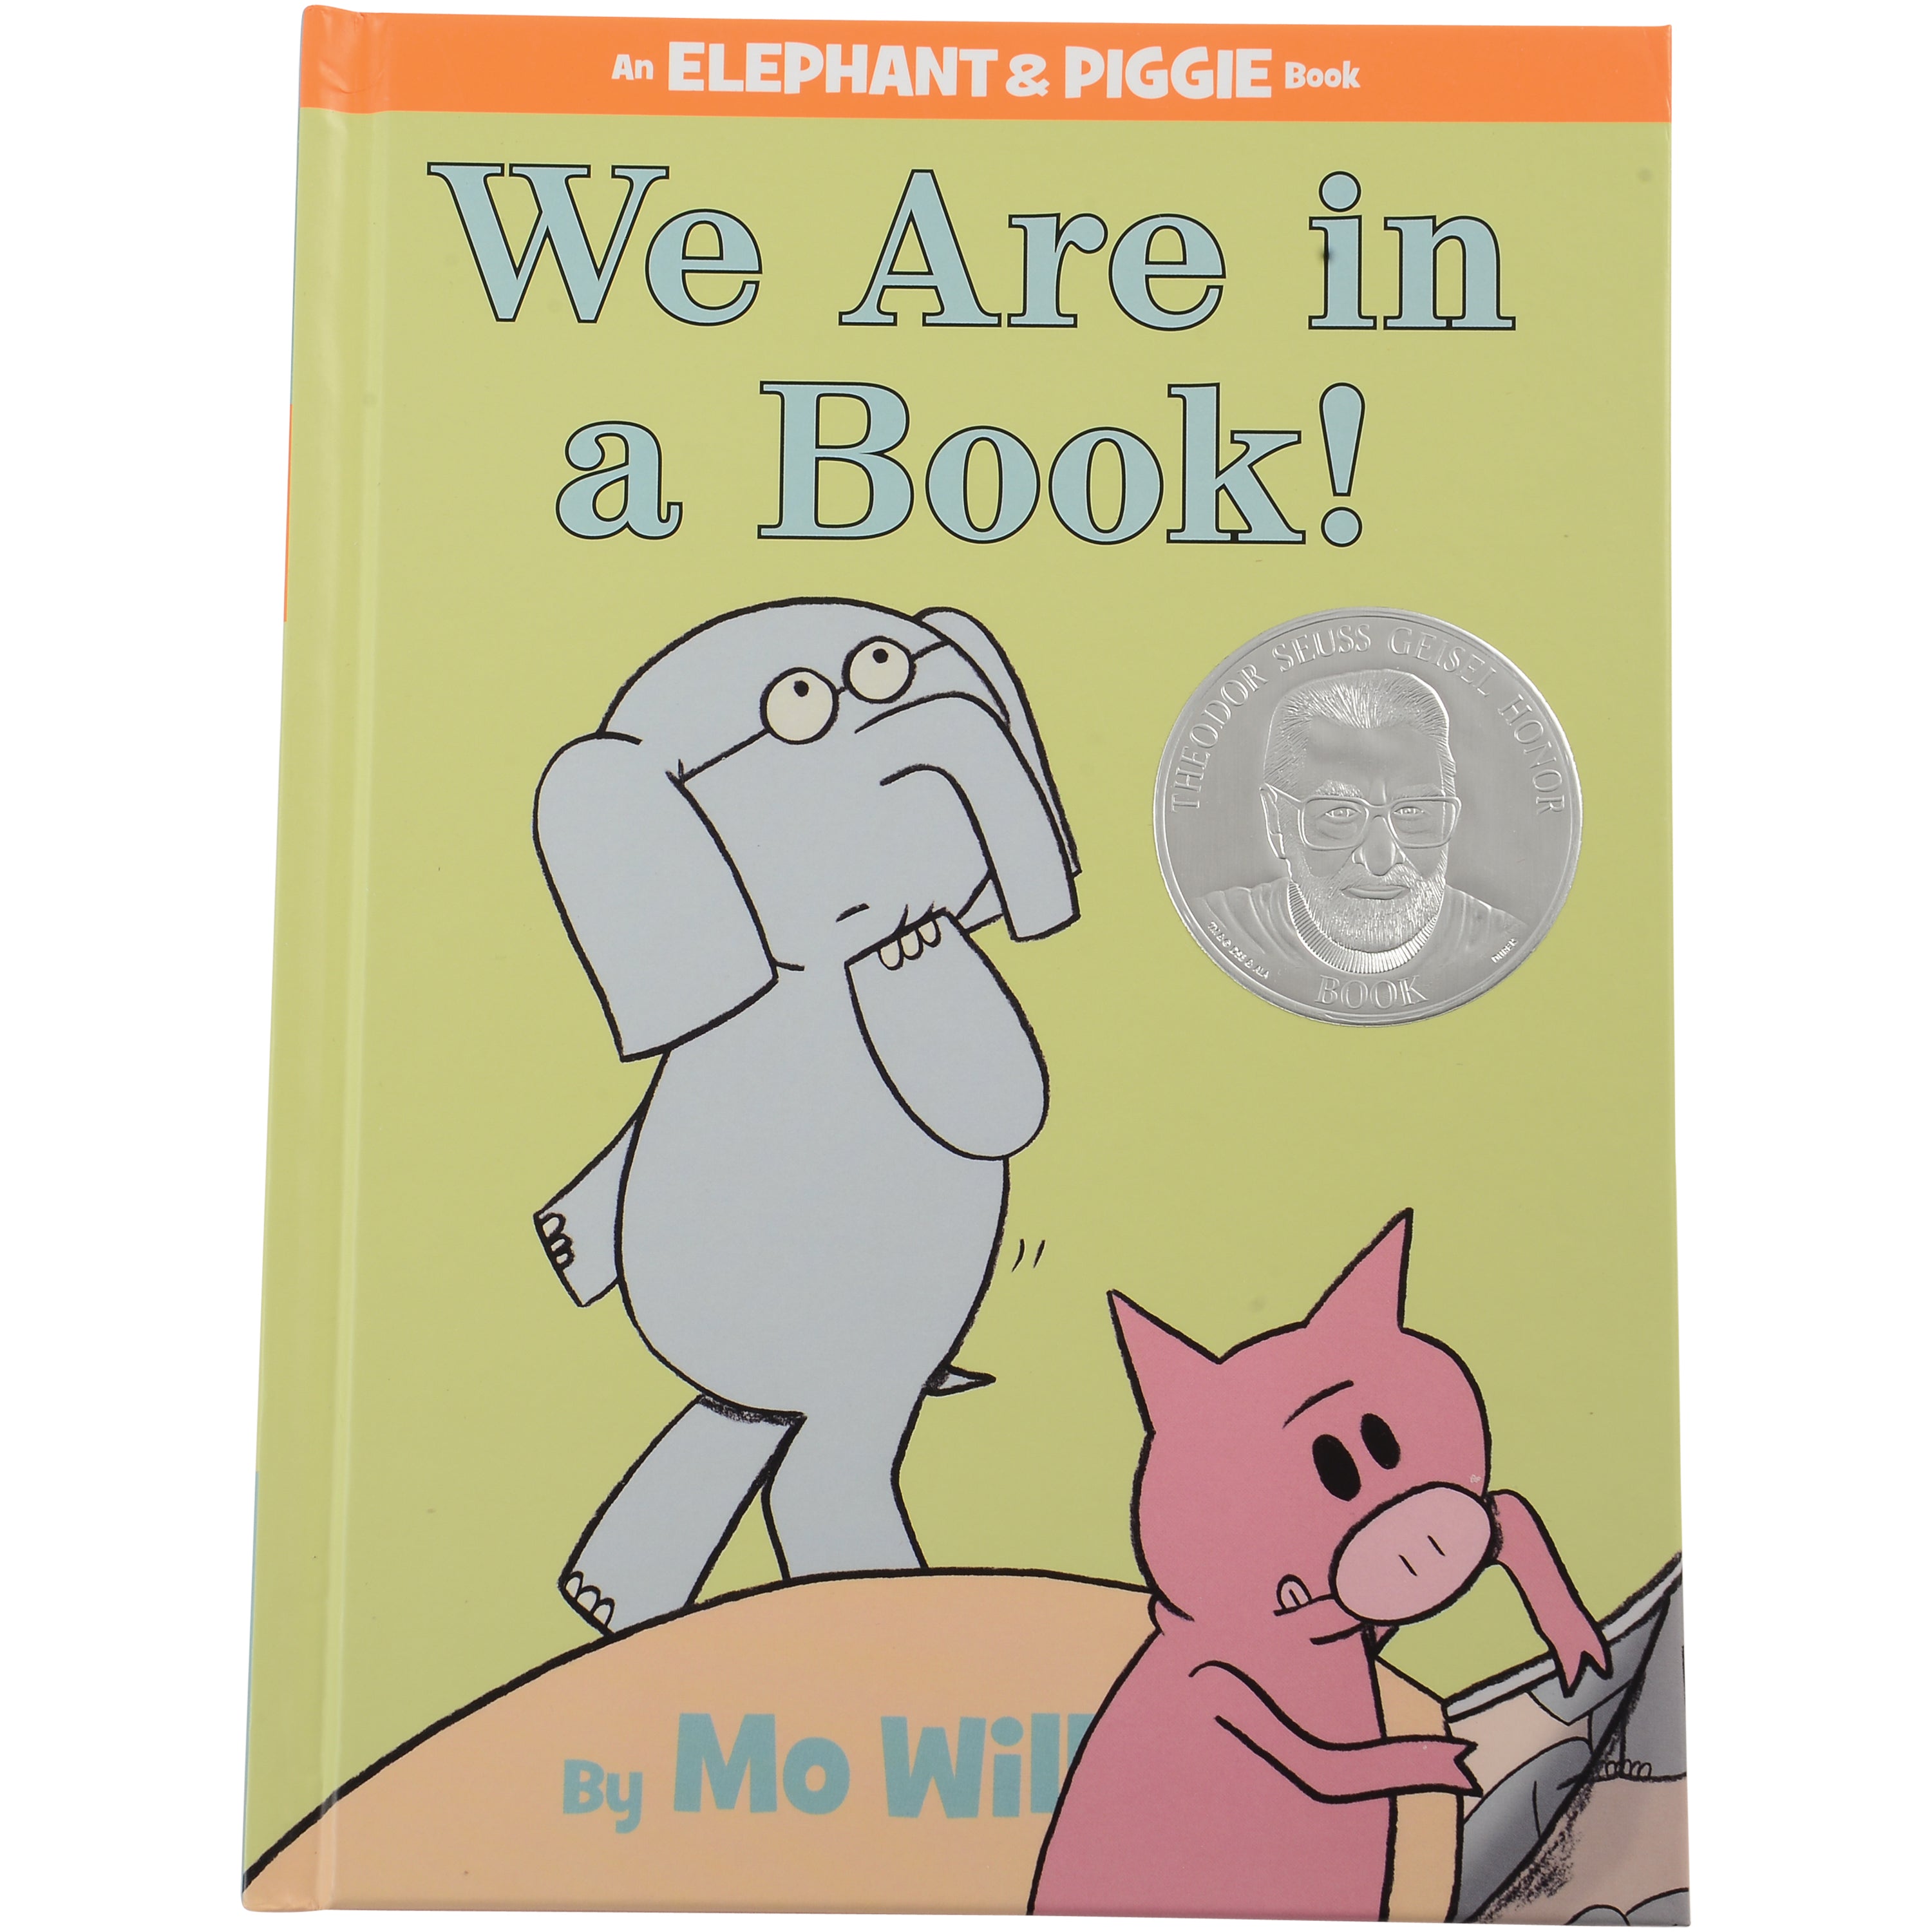 We Are In a Book - An Elephant and Piggie Book by Mo Willems